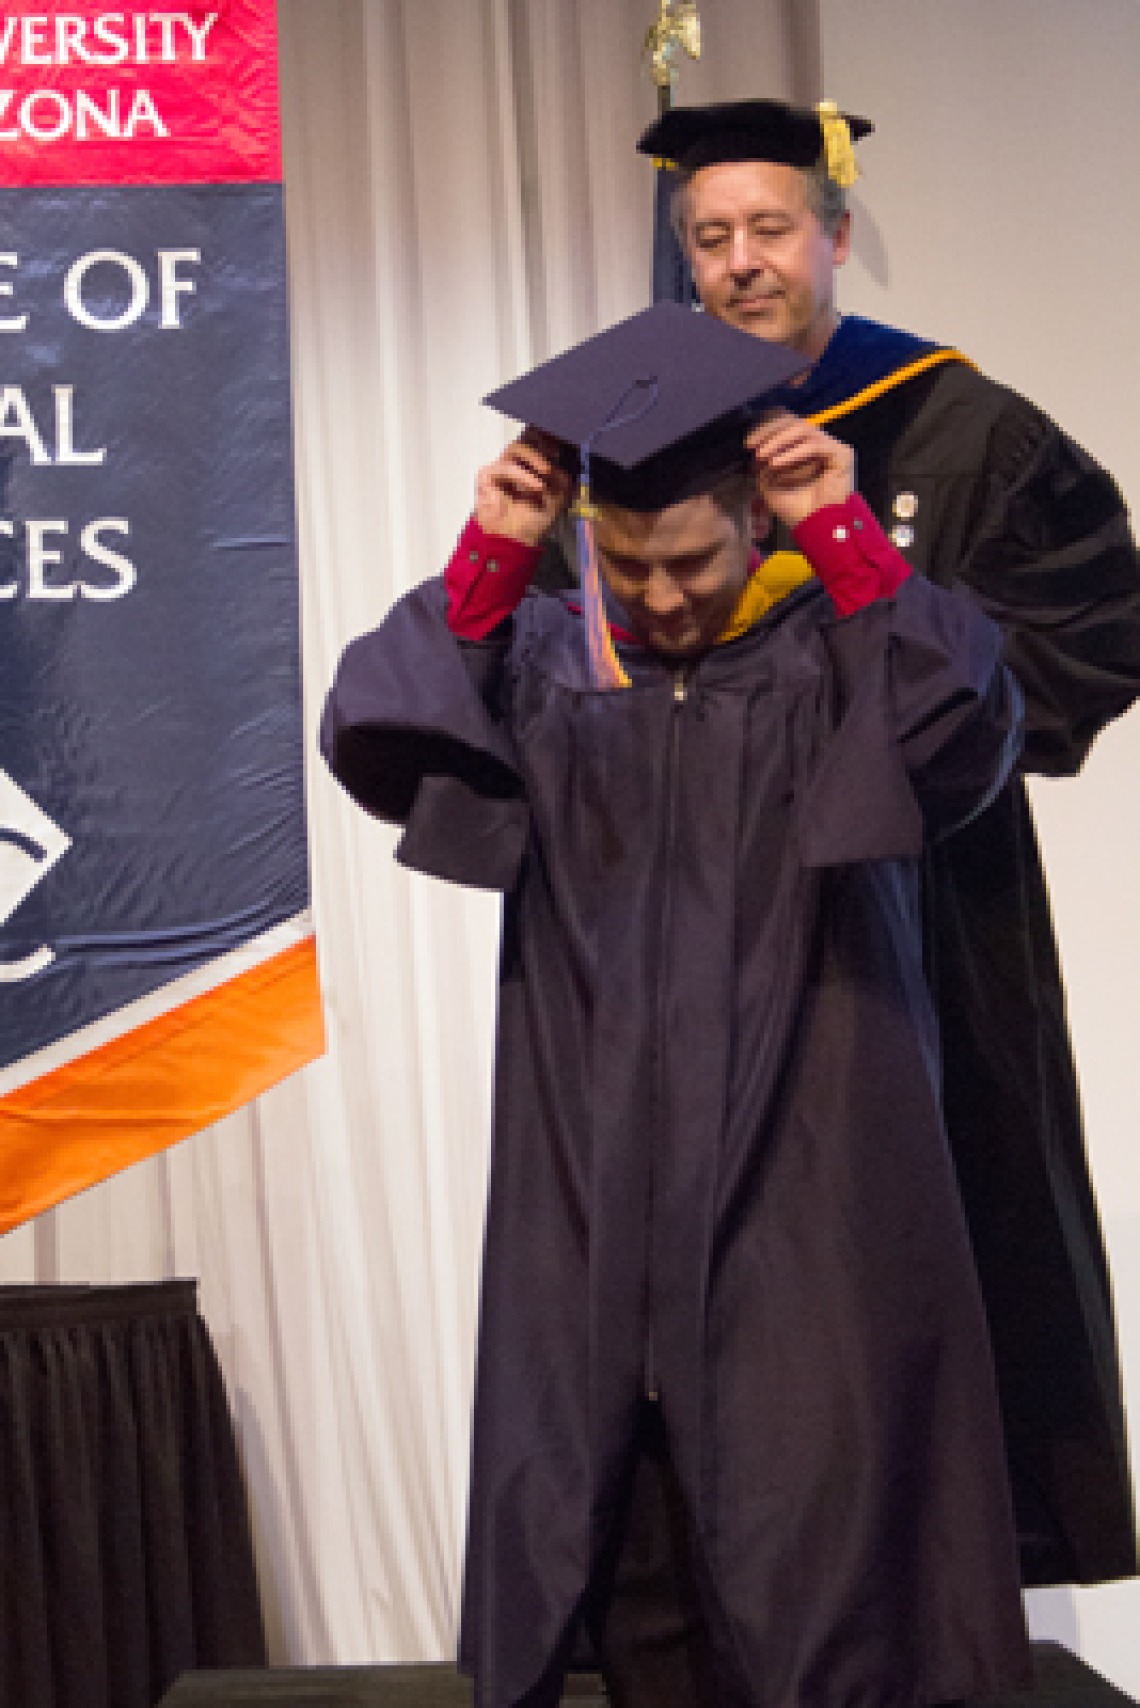 2015-PreCommencement-070